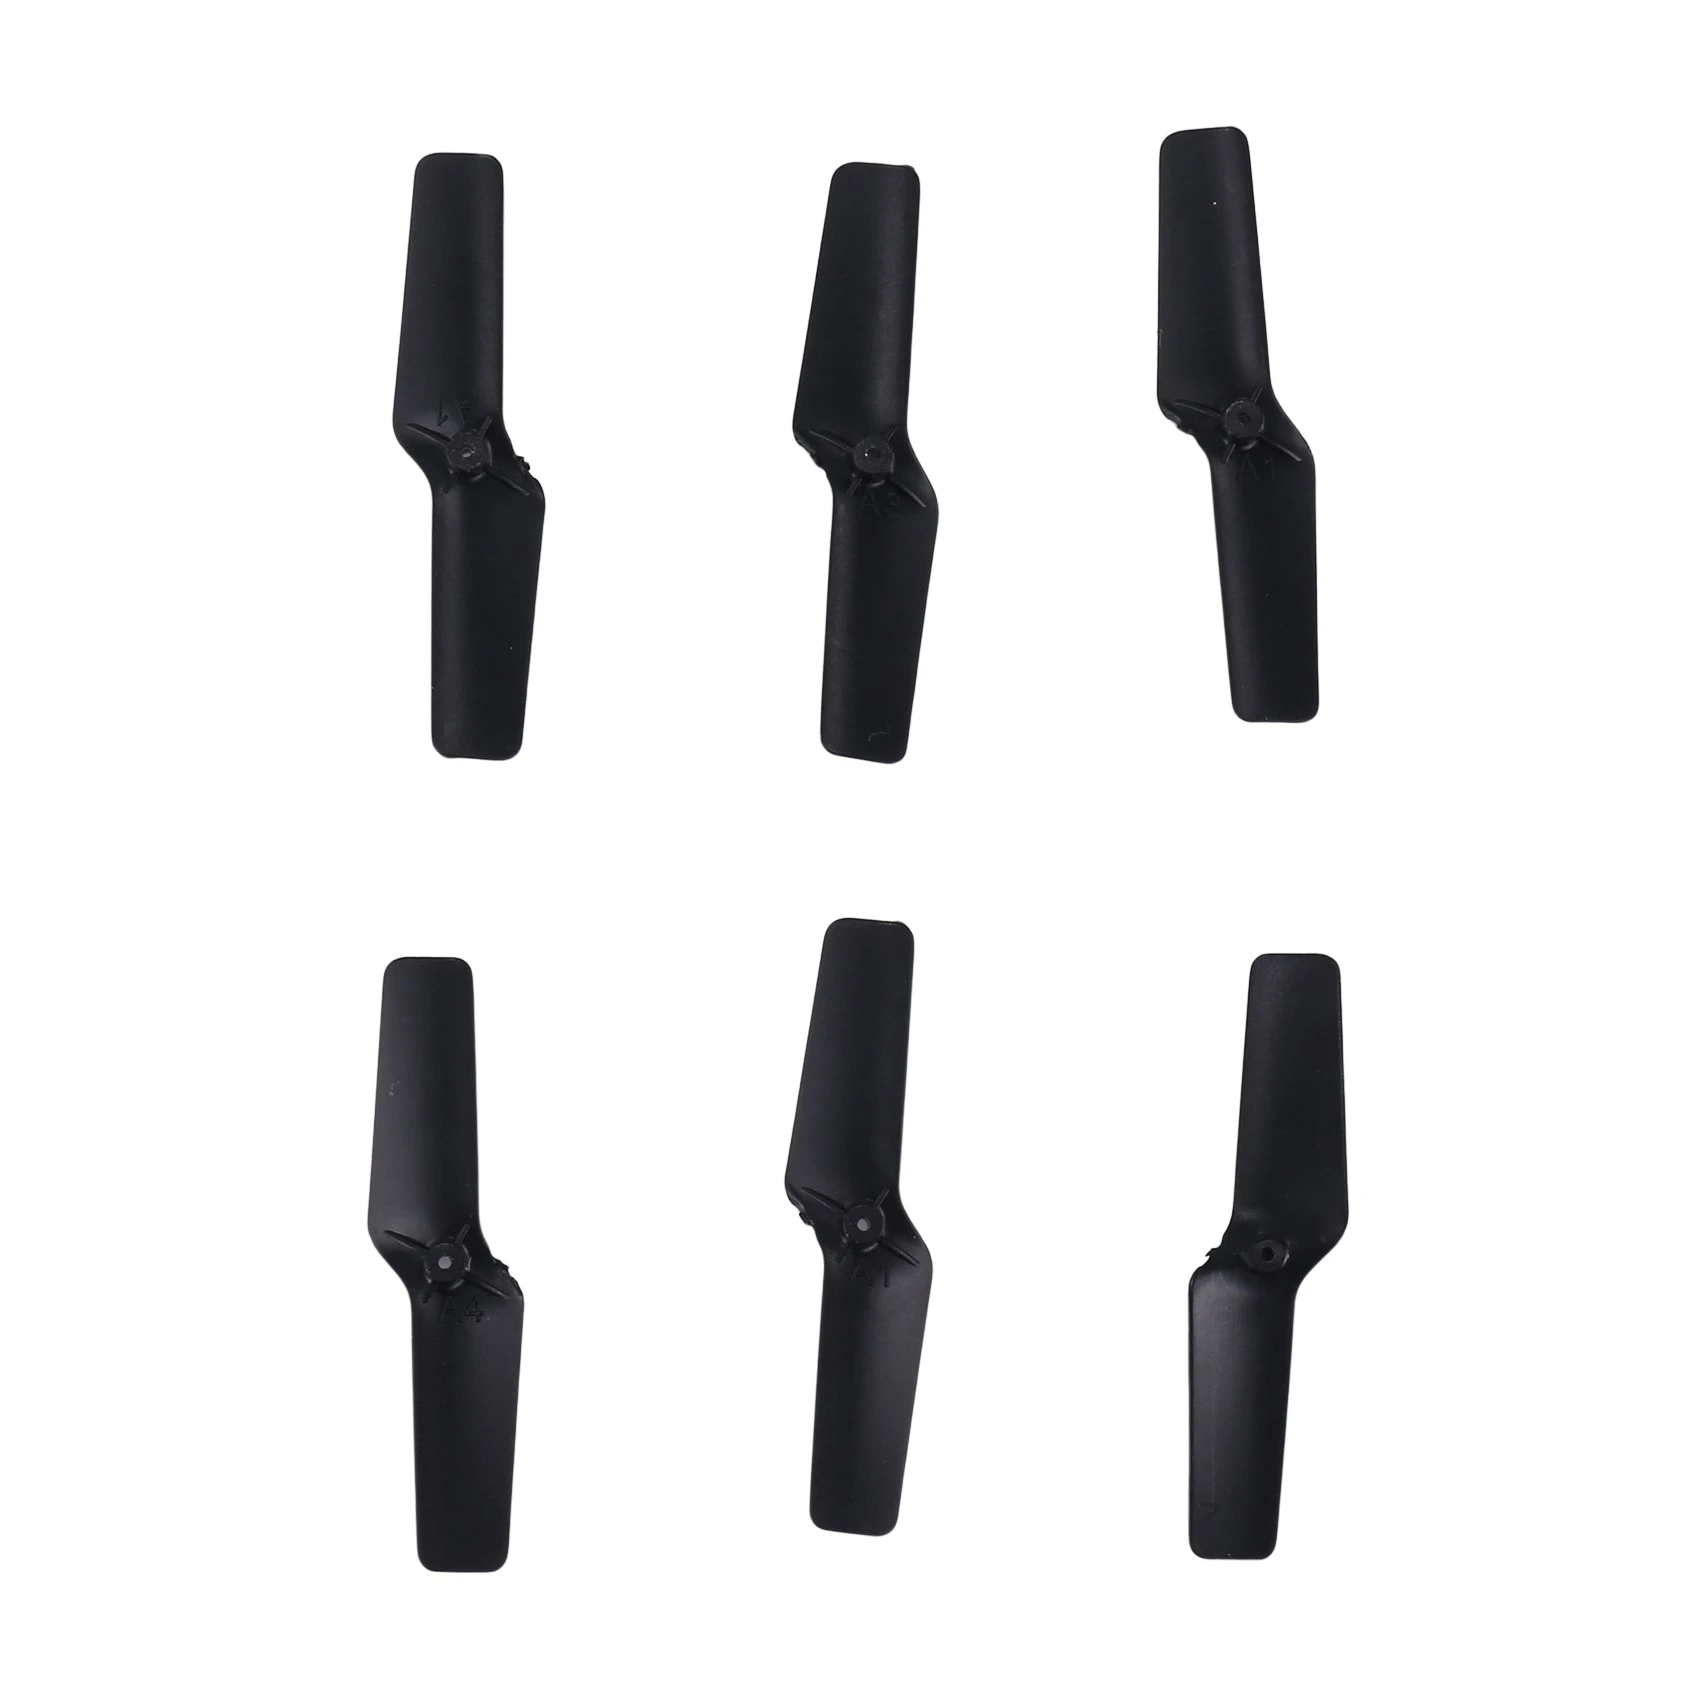 

6Pcs C186 Tail Blade for C186 C-186 RC Helicopter Airplane Drone Spare Parts Upgrade Accessories